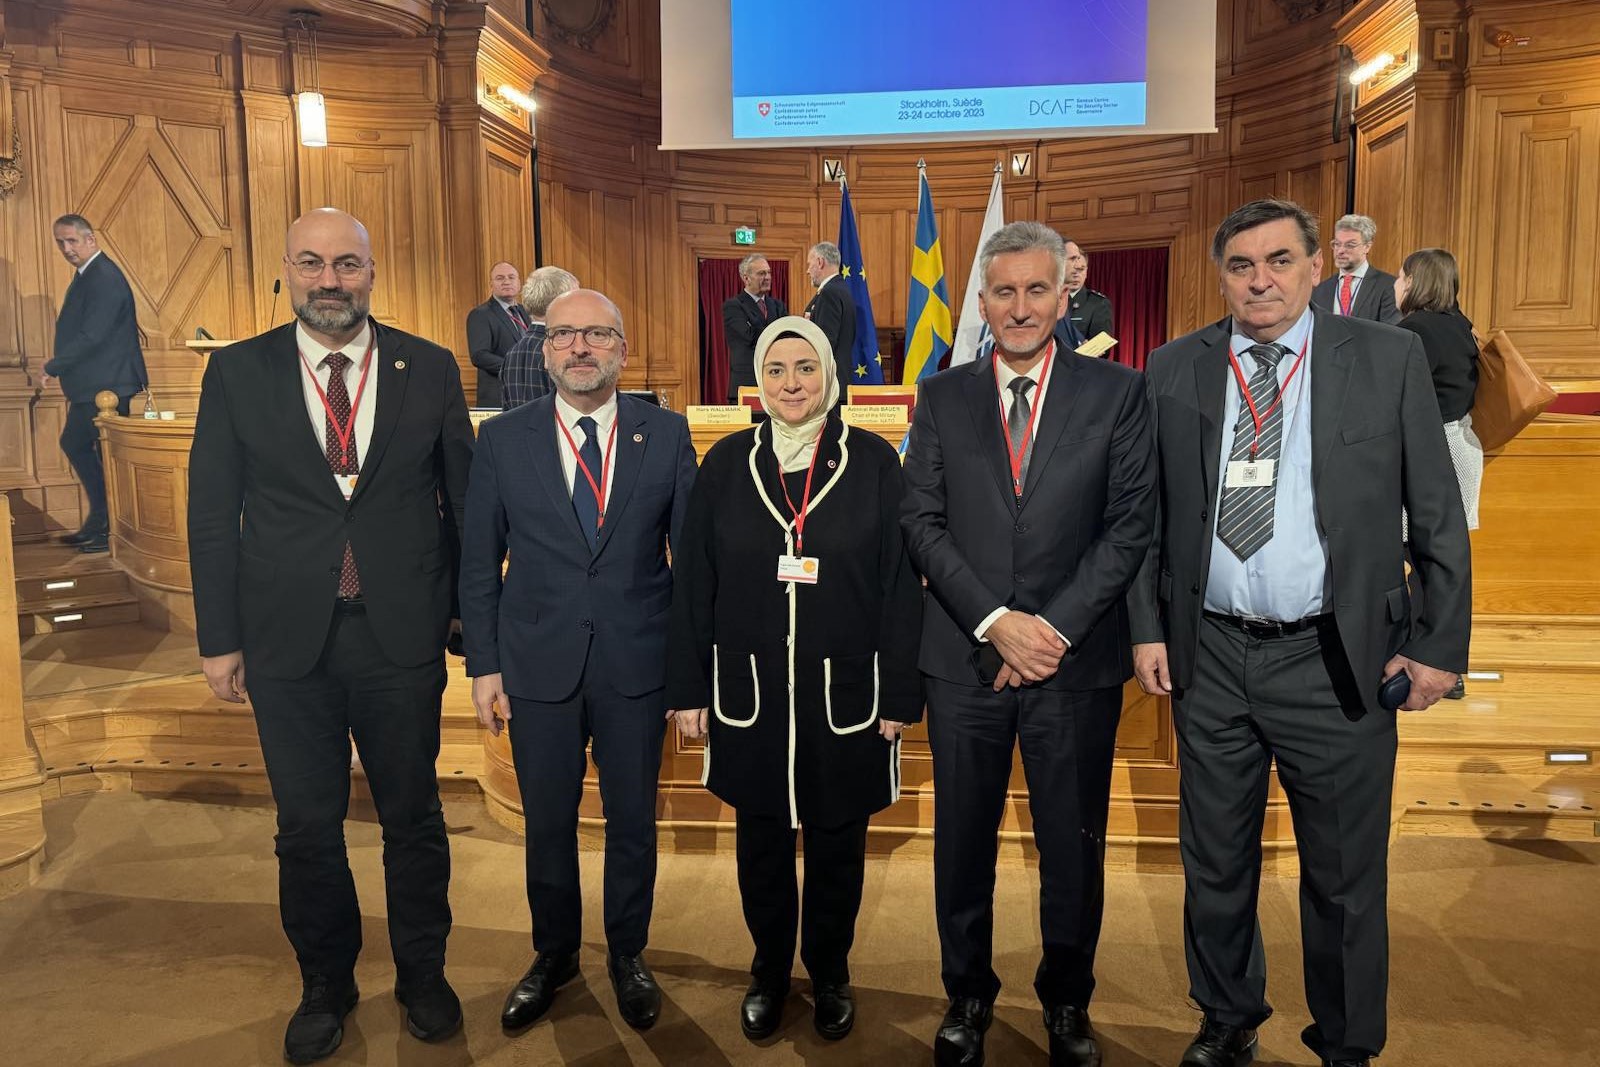 Members of the Parliamentary Assembly of Bosnia and Herzegovina (PABiH) Delegation to NATO PA met with the Delegation of the Grand National Assembly of the Republic of Turkey to NATO PA